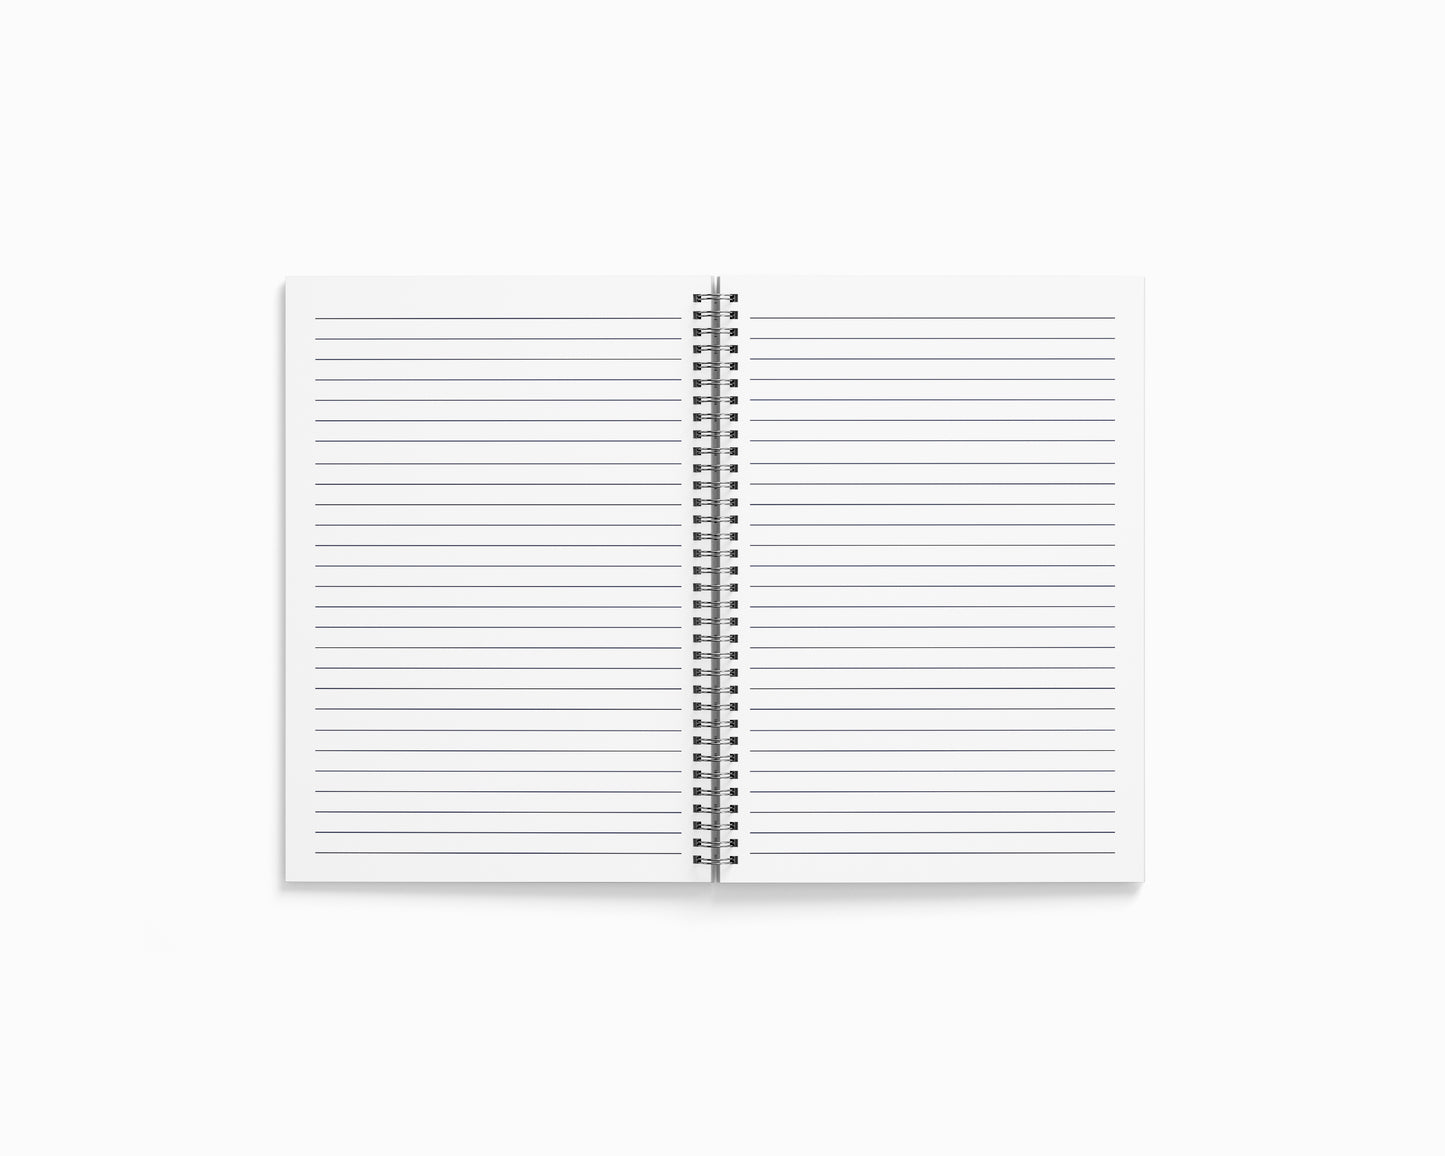 Abiramam Notebook (A5 Size, 100 Pages, Ruled)